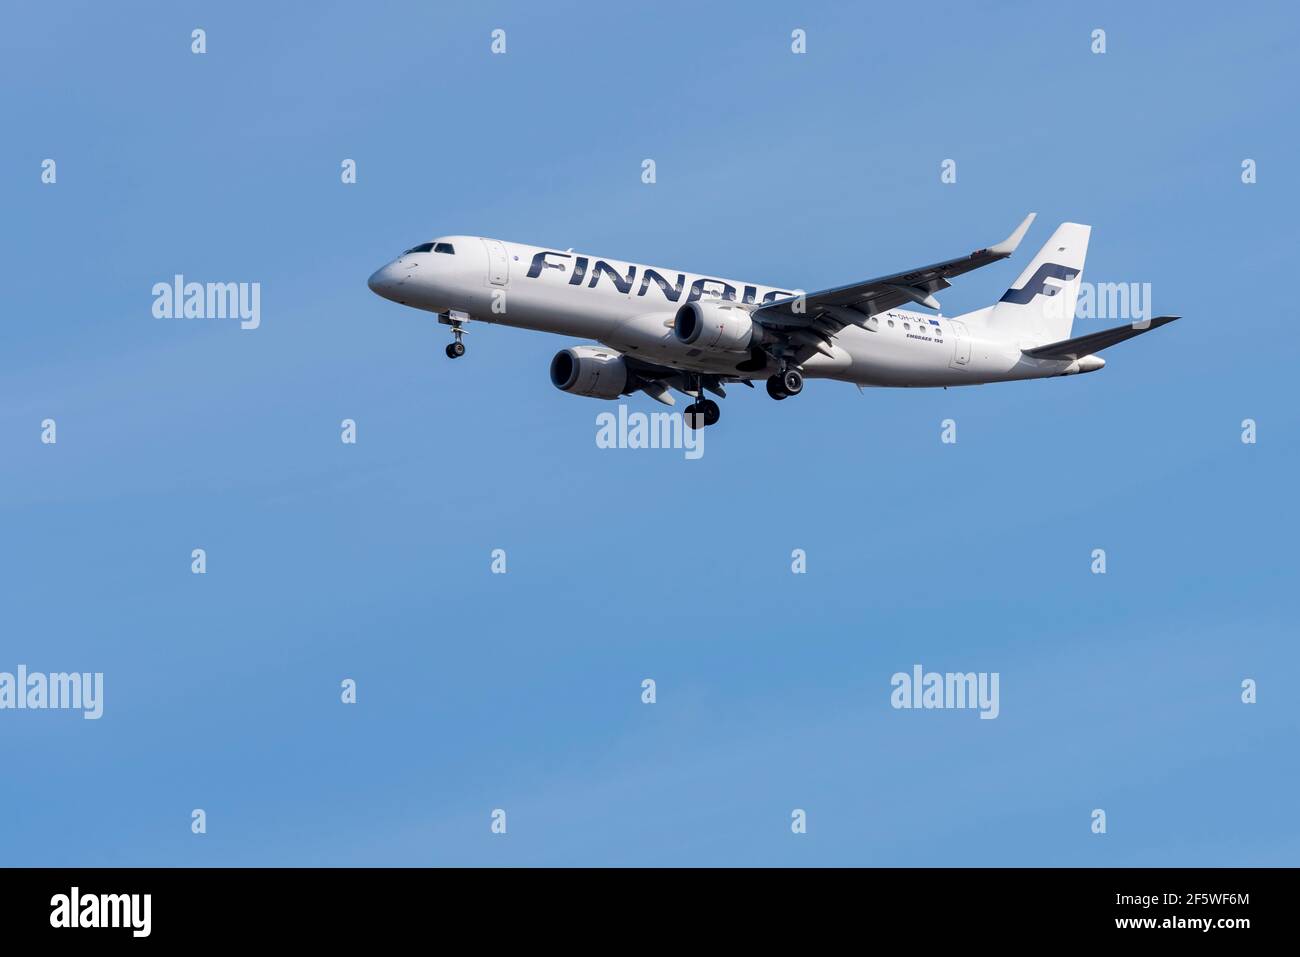 Finnair Embraer ERJ 190 jet airliner plane OH-LKL on finals to land at London Heathrow Airport, UK, in blue sky. Finnish, flag carrier airline Finland Stock Photo